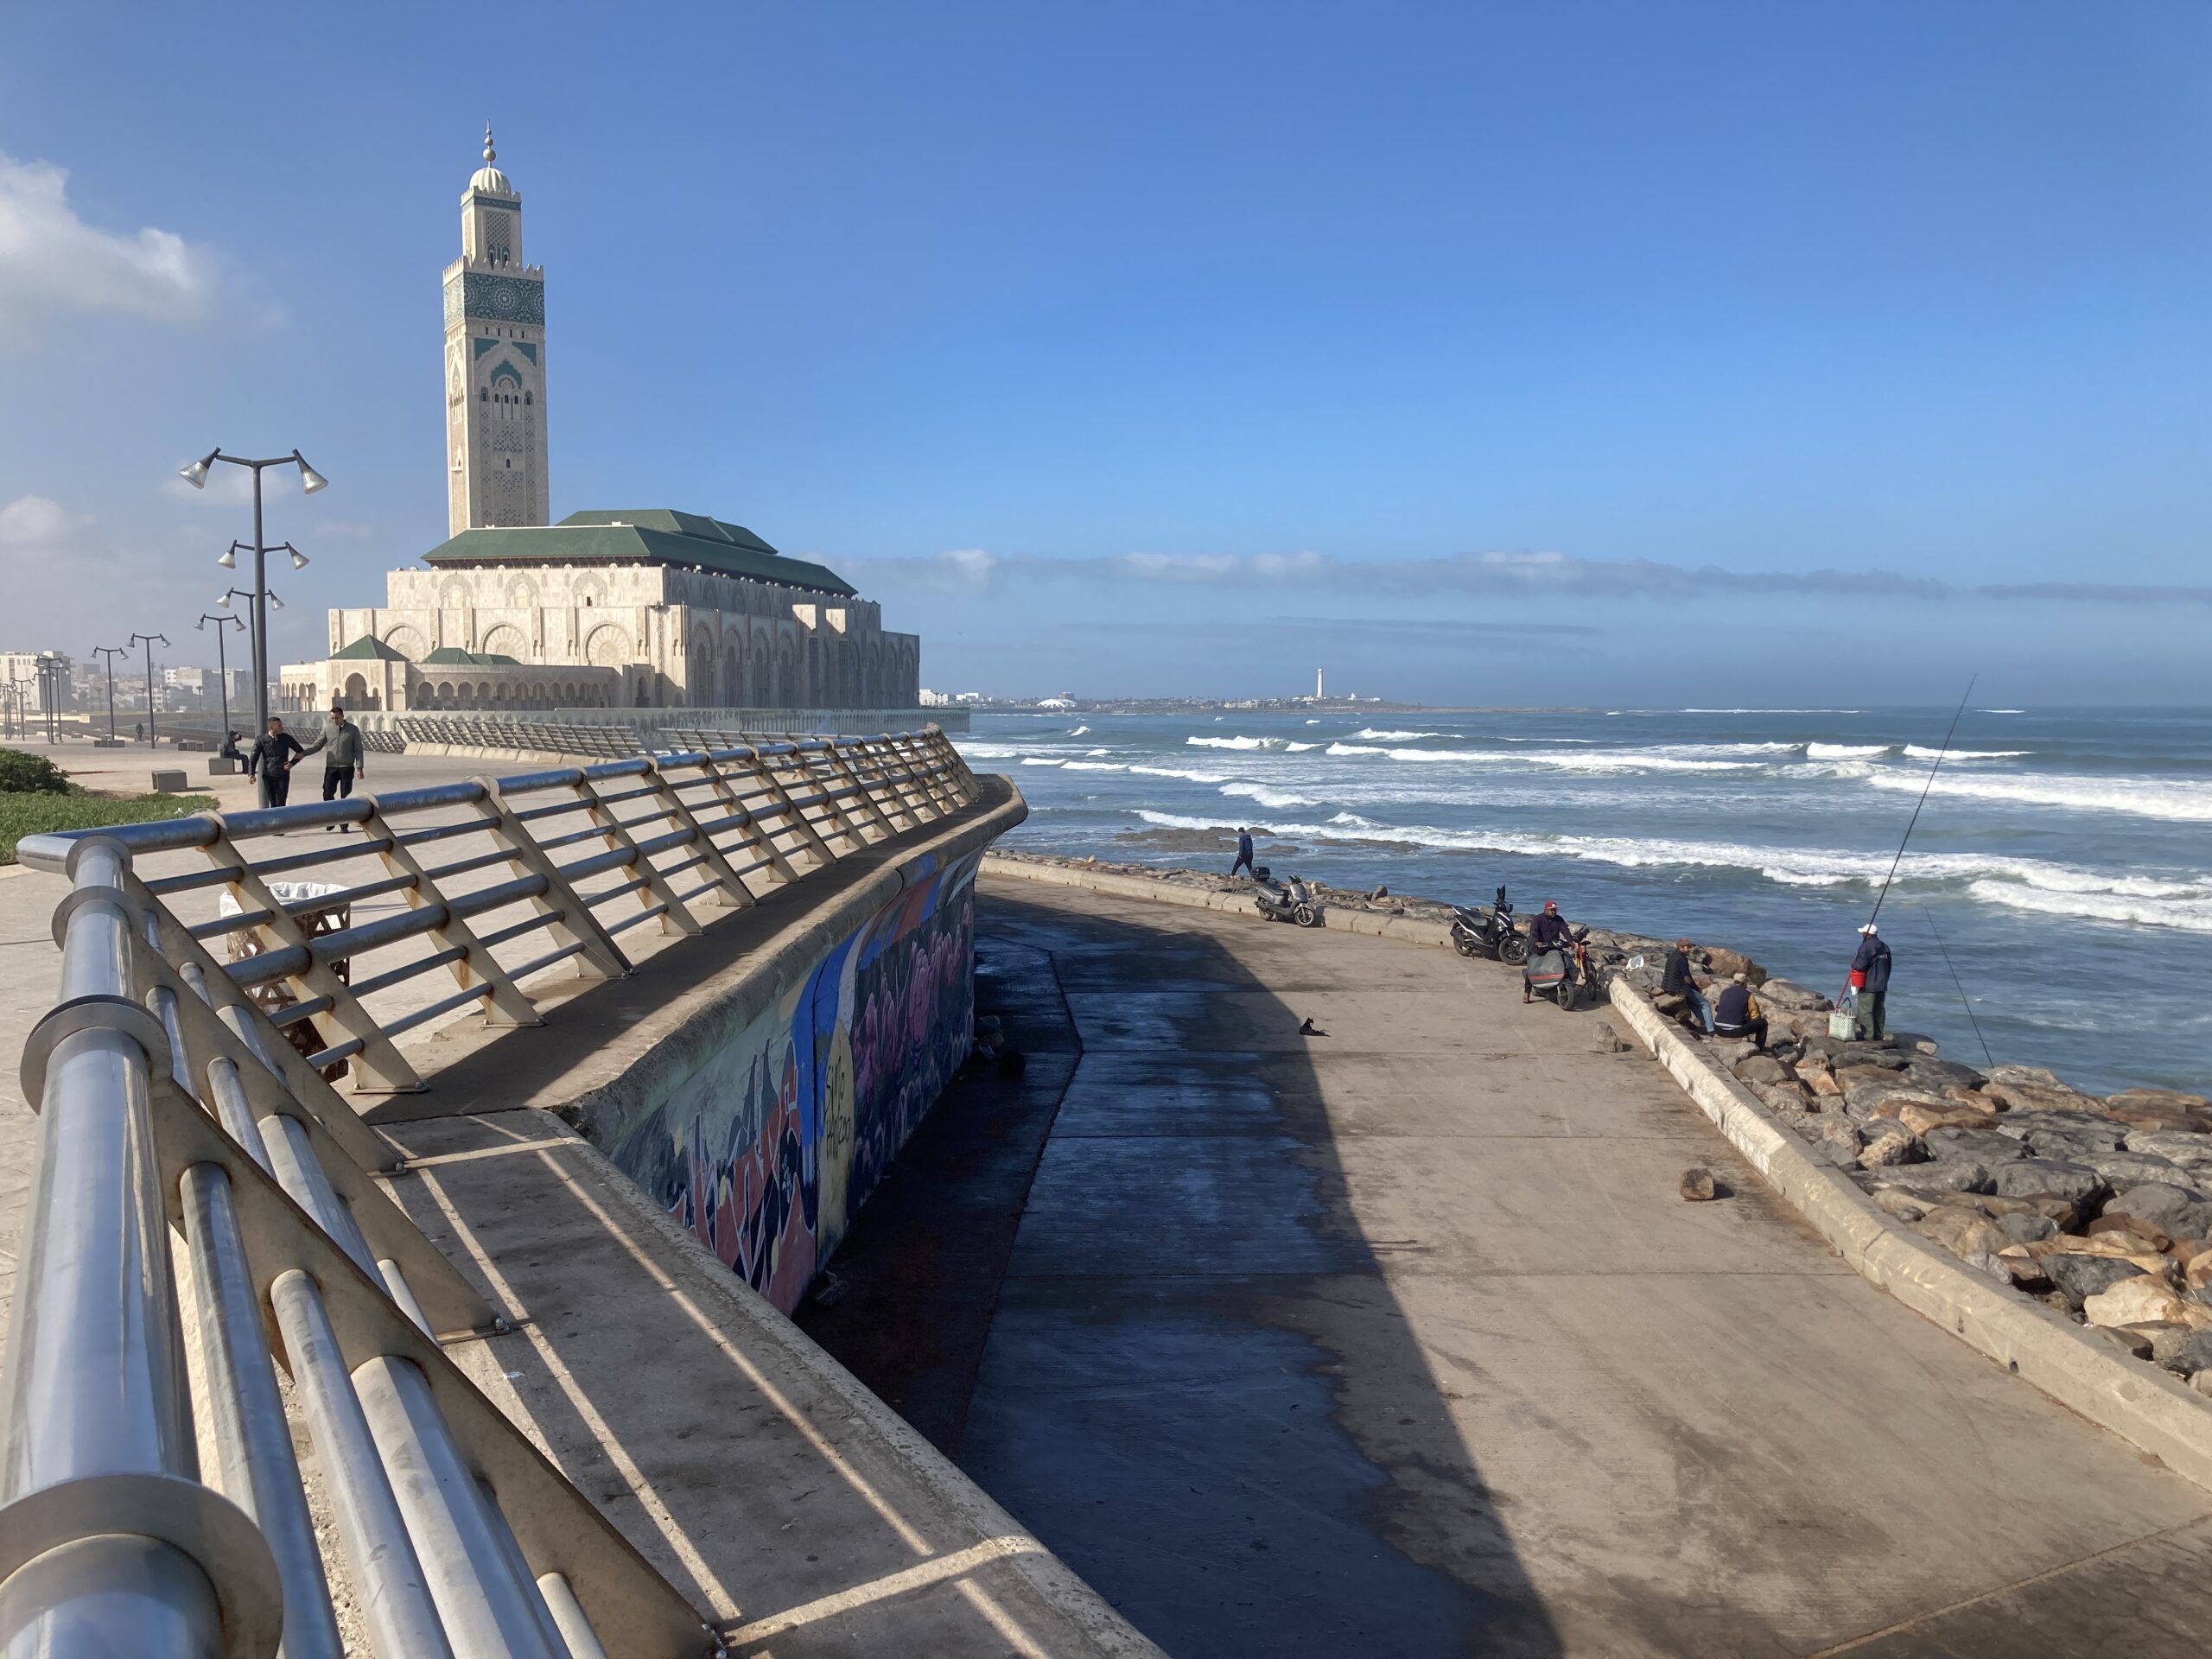 A view along the beach at Marina Park near the Hassan II Mosque